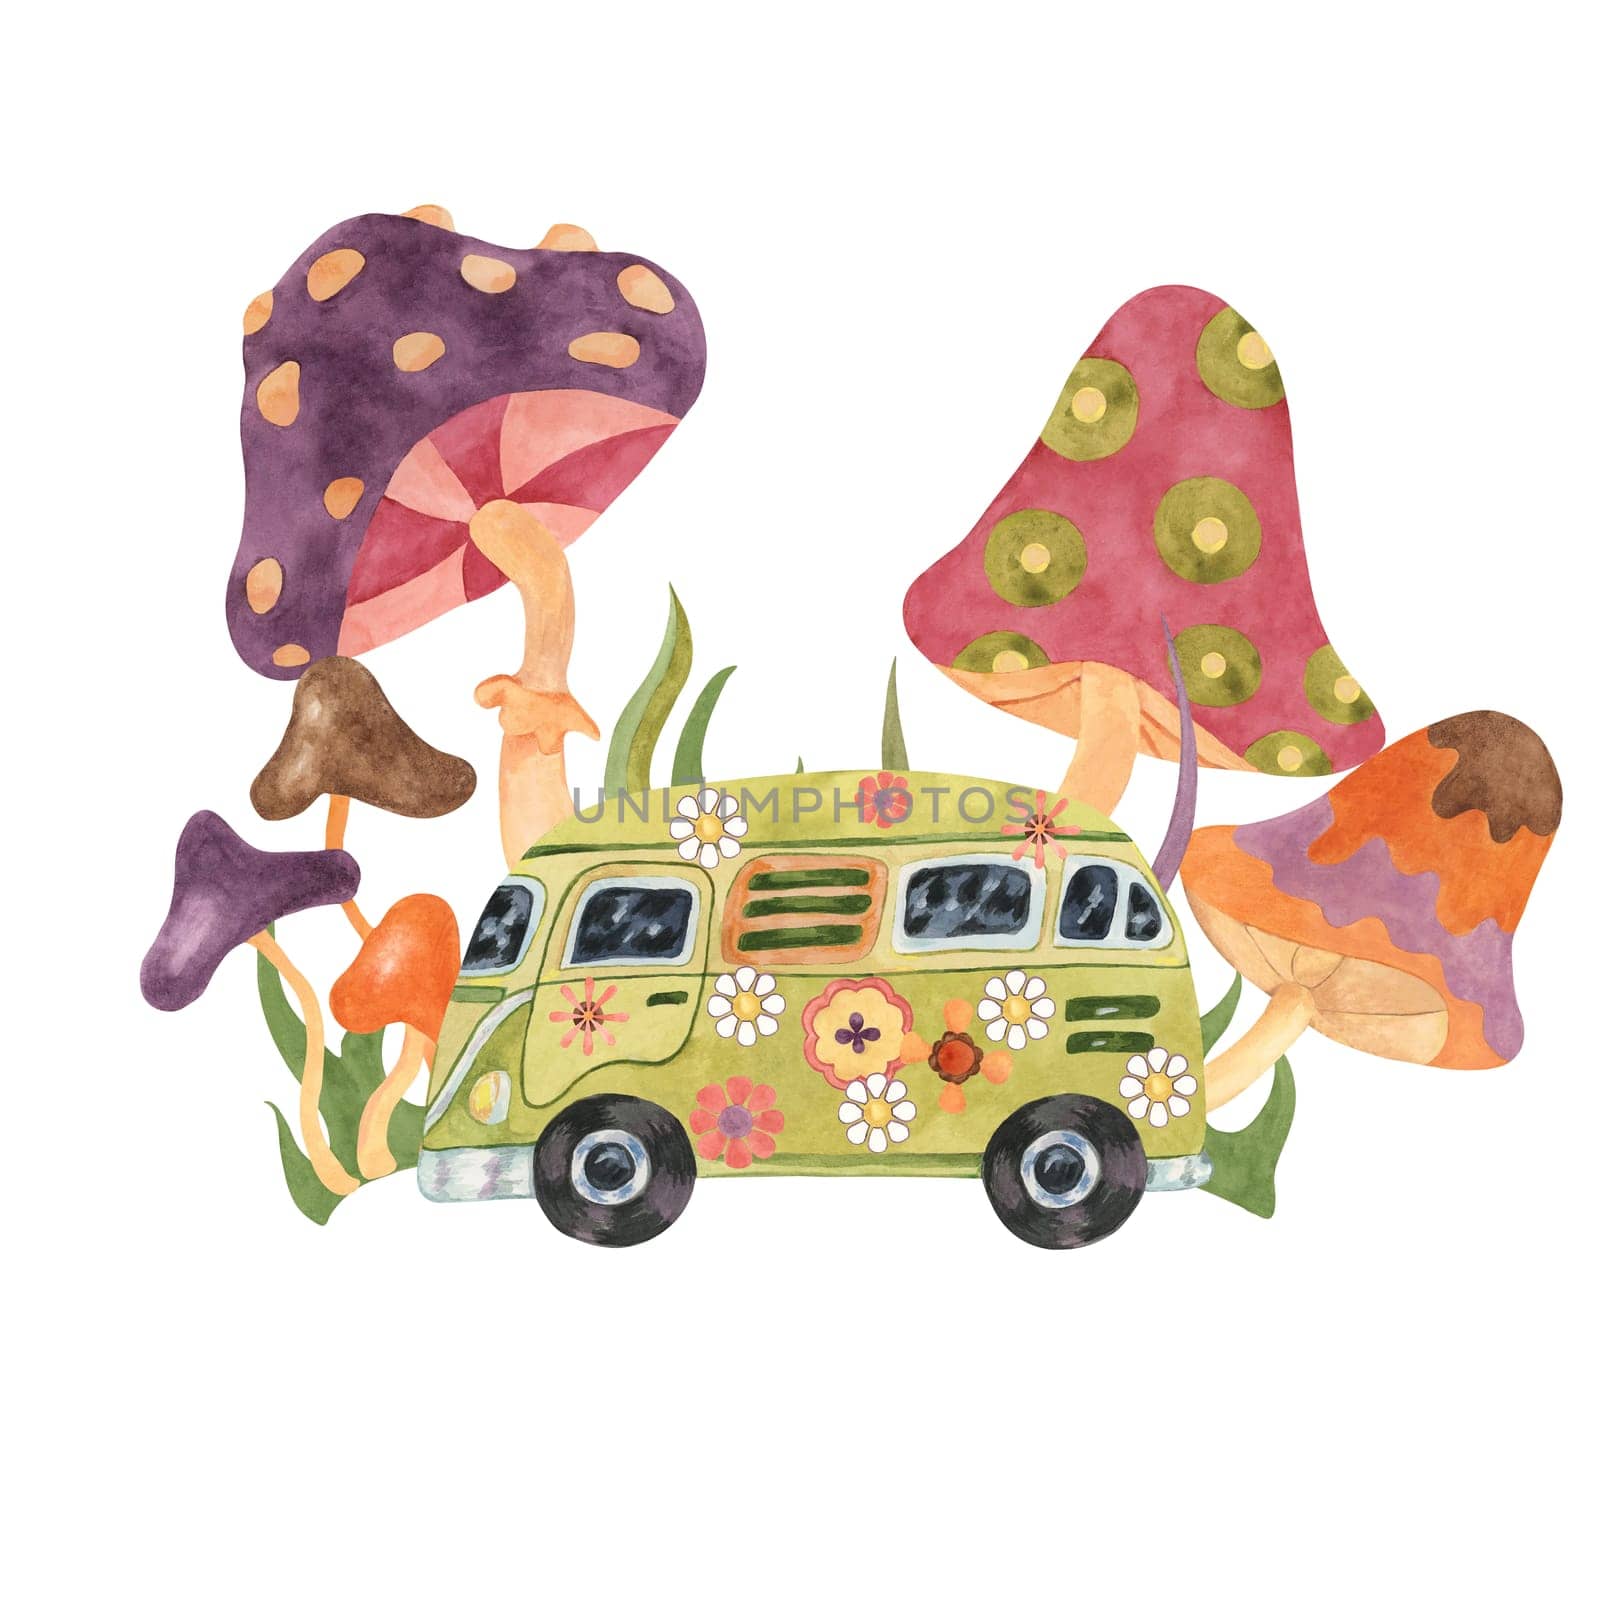 Trippy mushrooms, groovy hippie camper van mycophile print tee. Retro bus, fly agarics fungi 70s 60s style hand drawn vintage graphic t shirt design. by Fofito